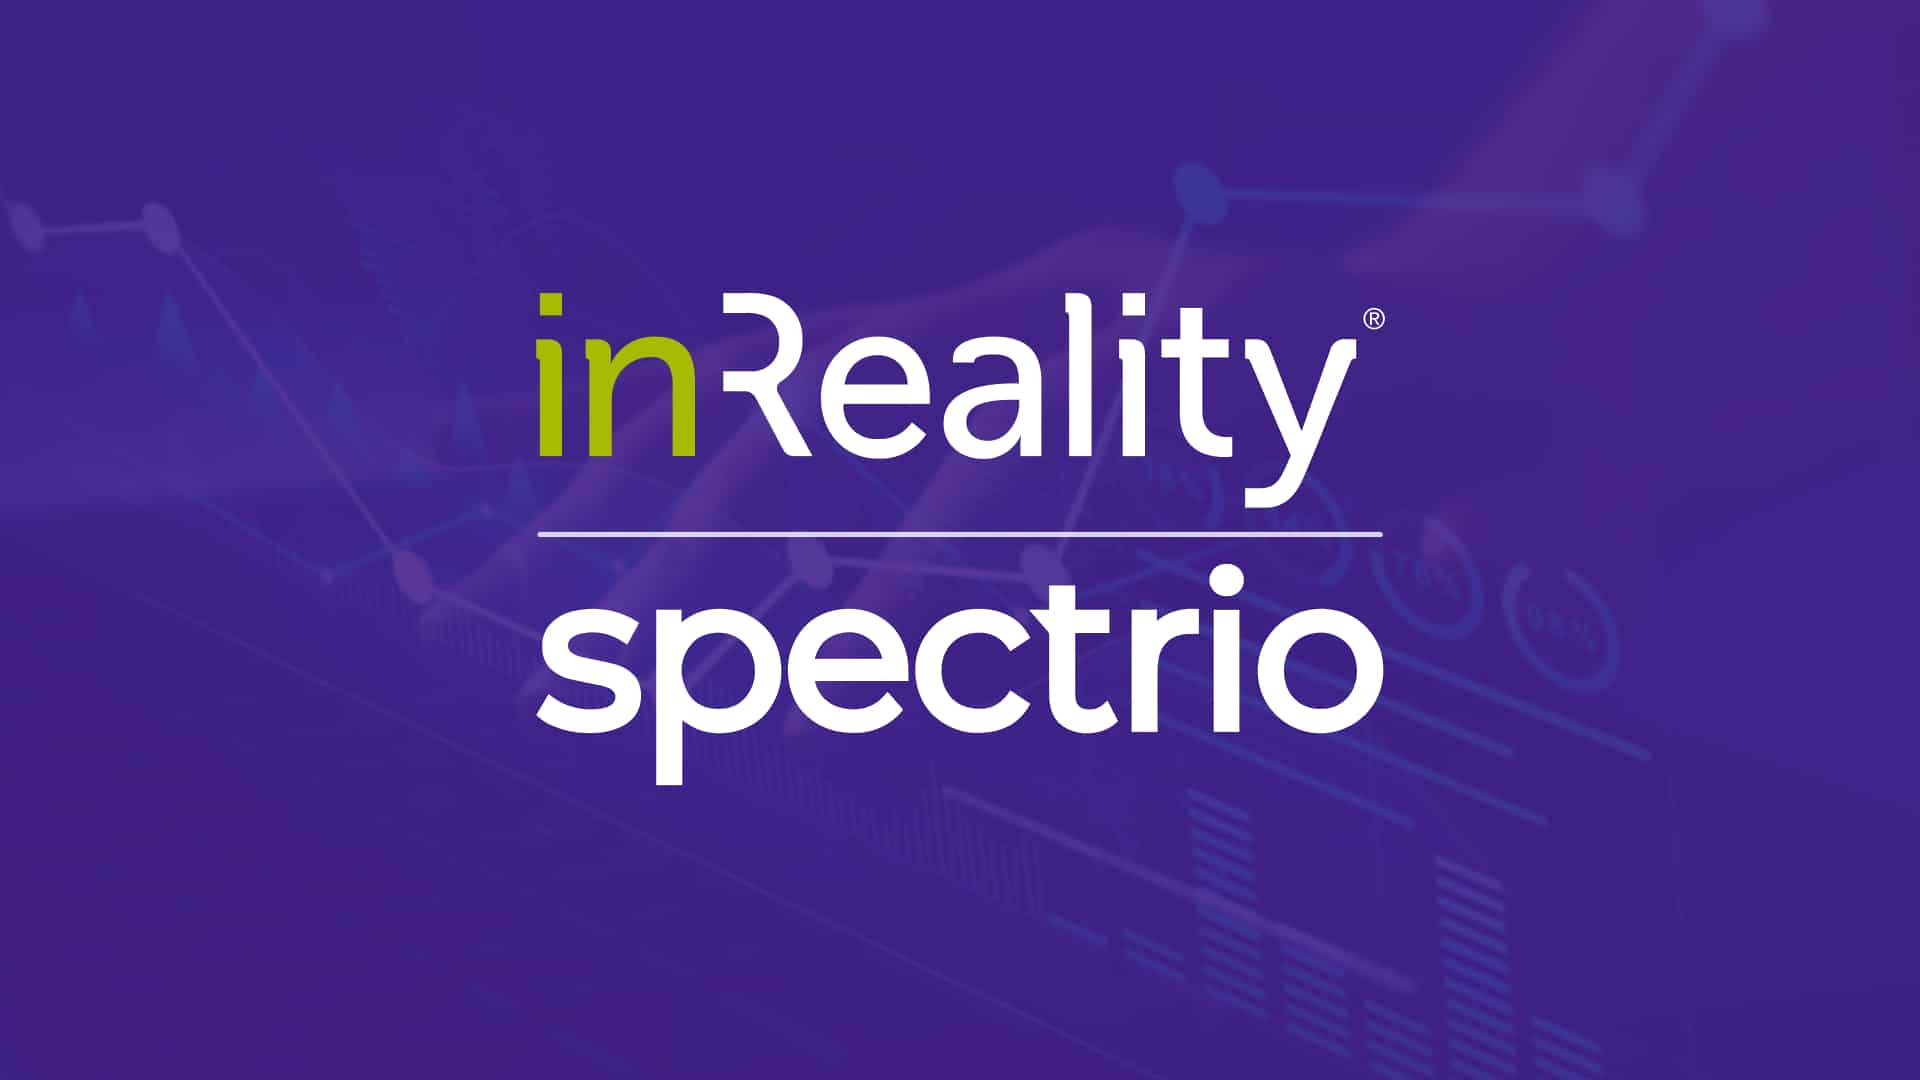 inReality and Spectrio logos over a technology background